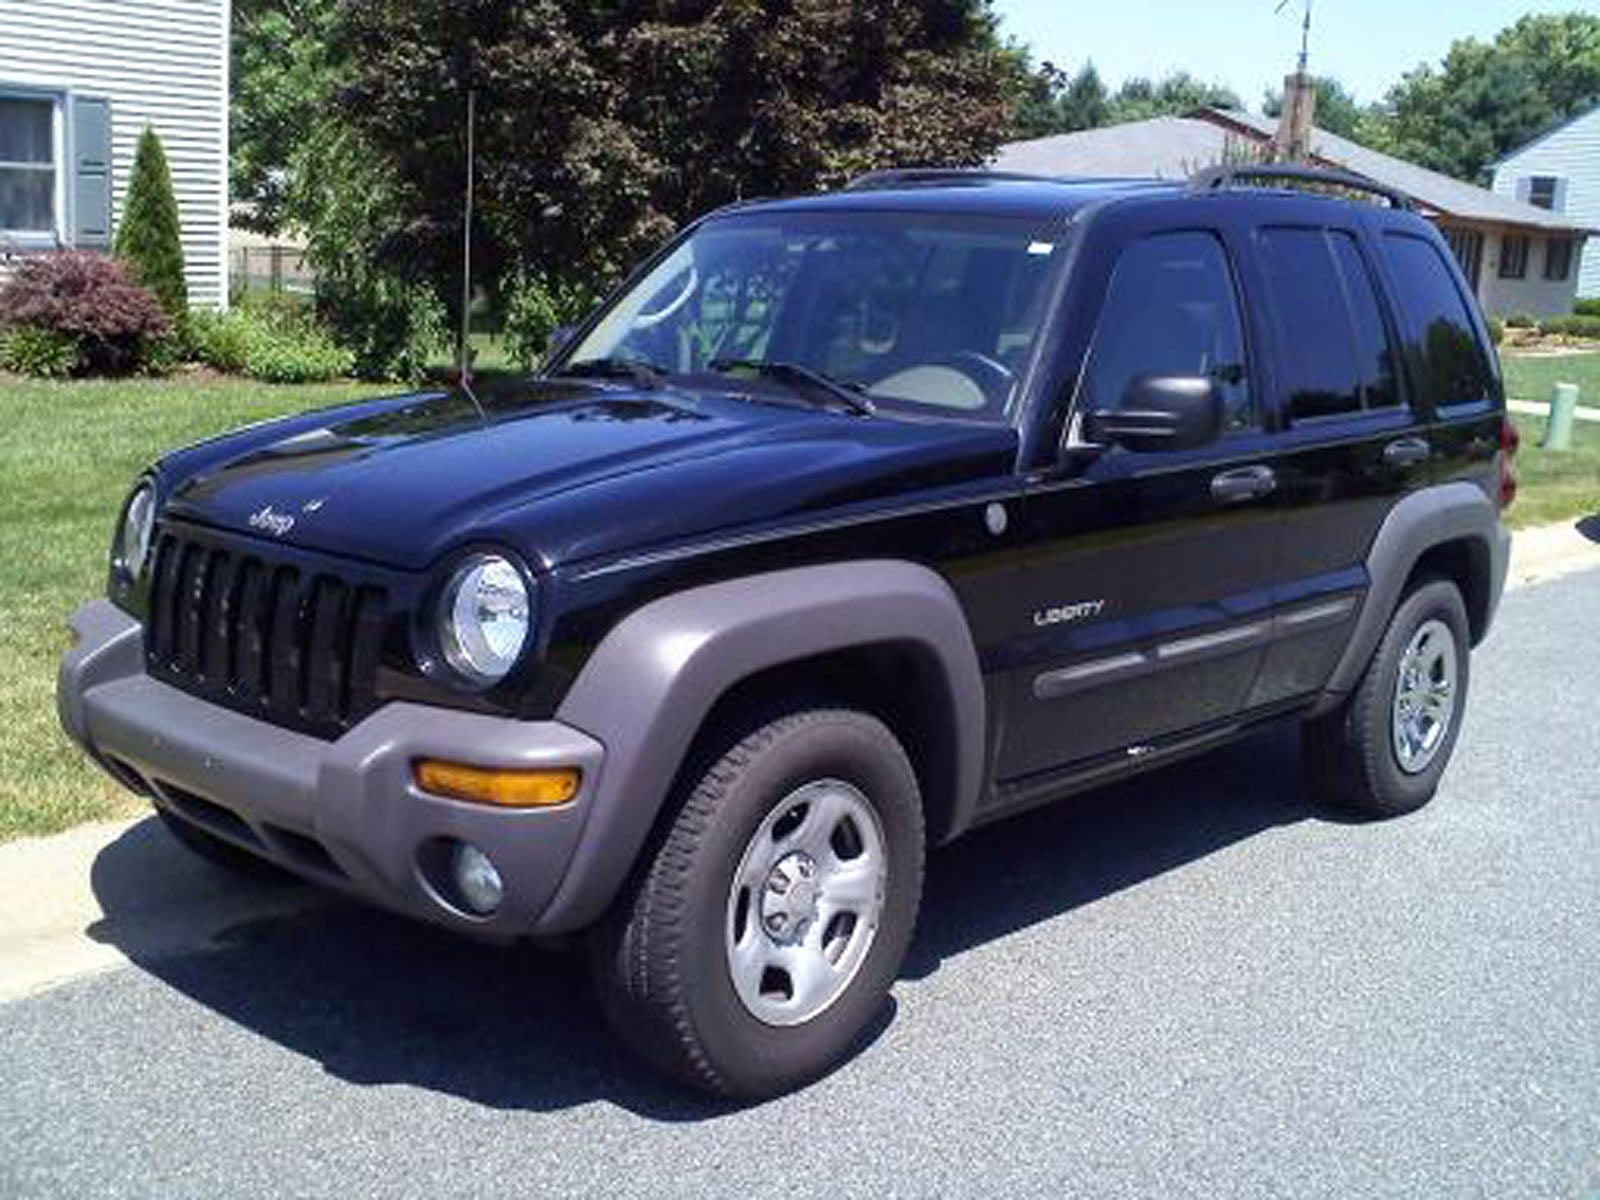 Ratings for jeep liberty 2004